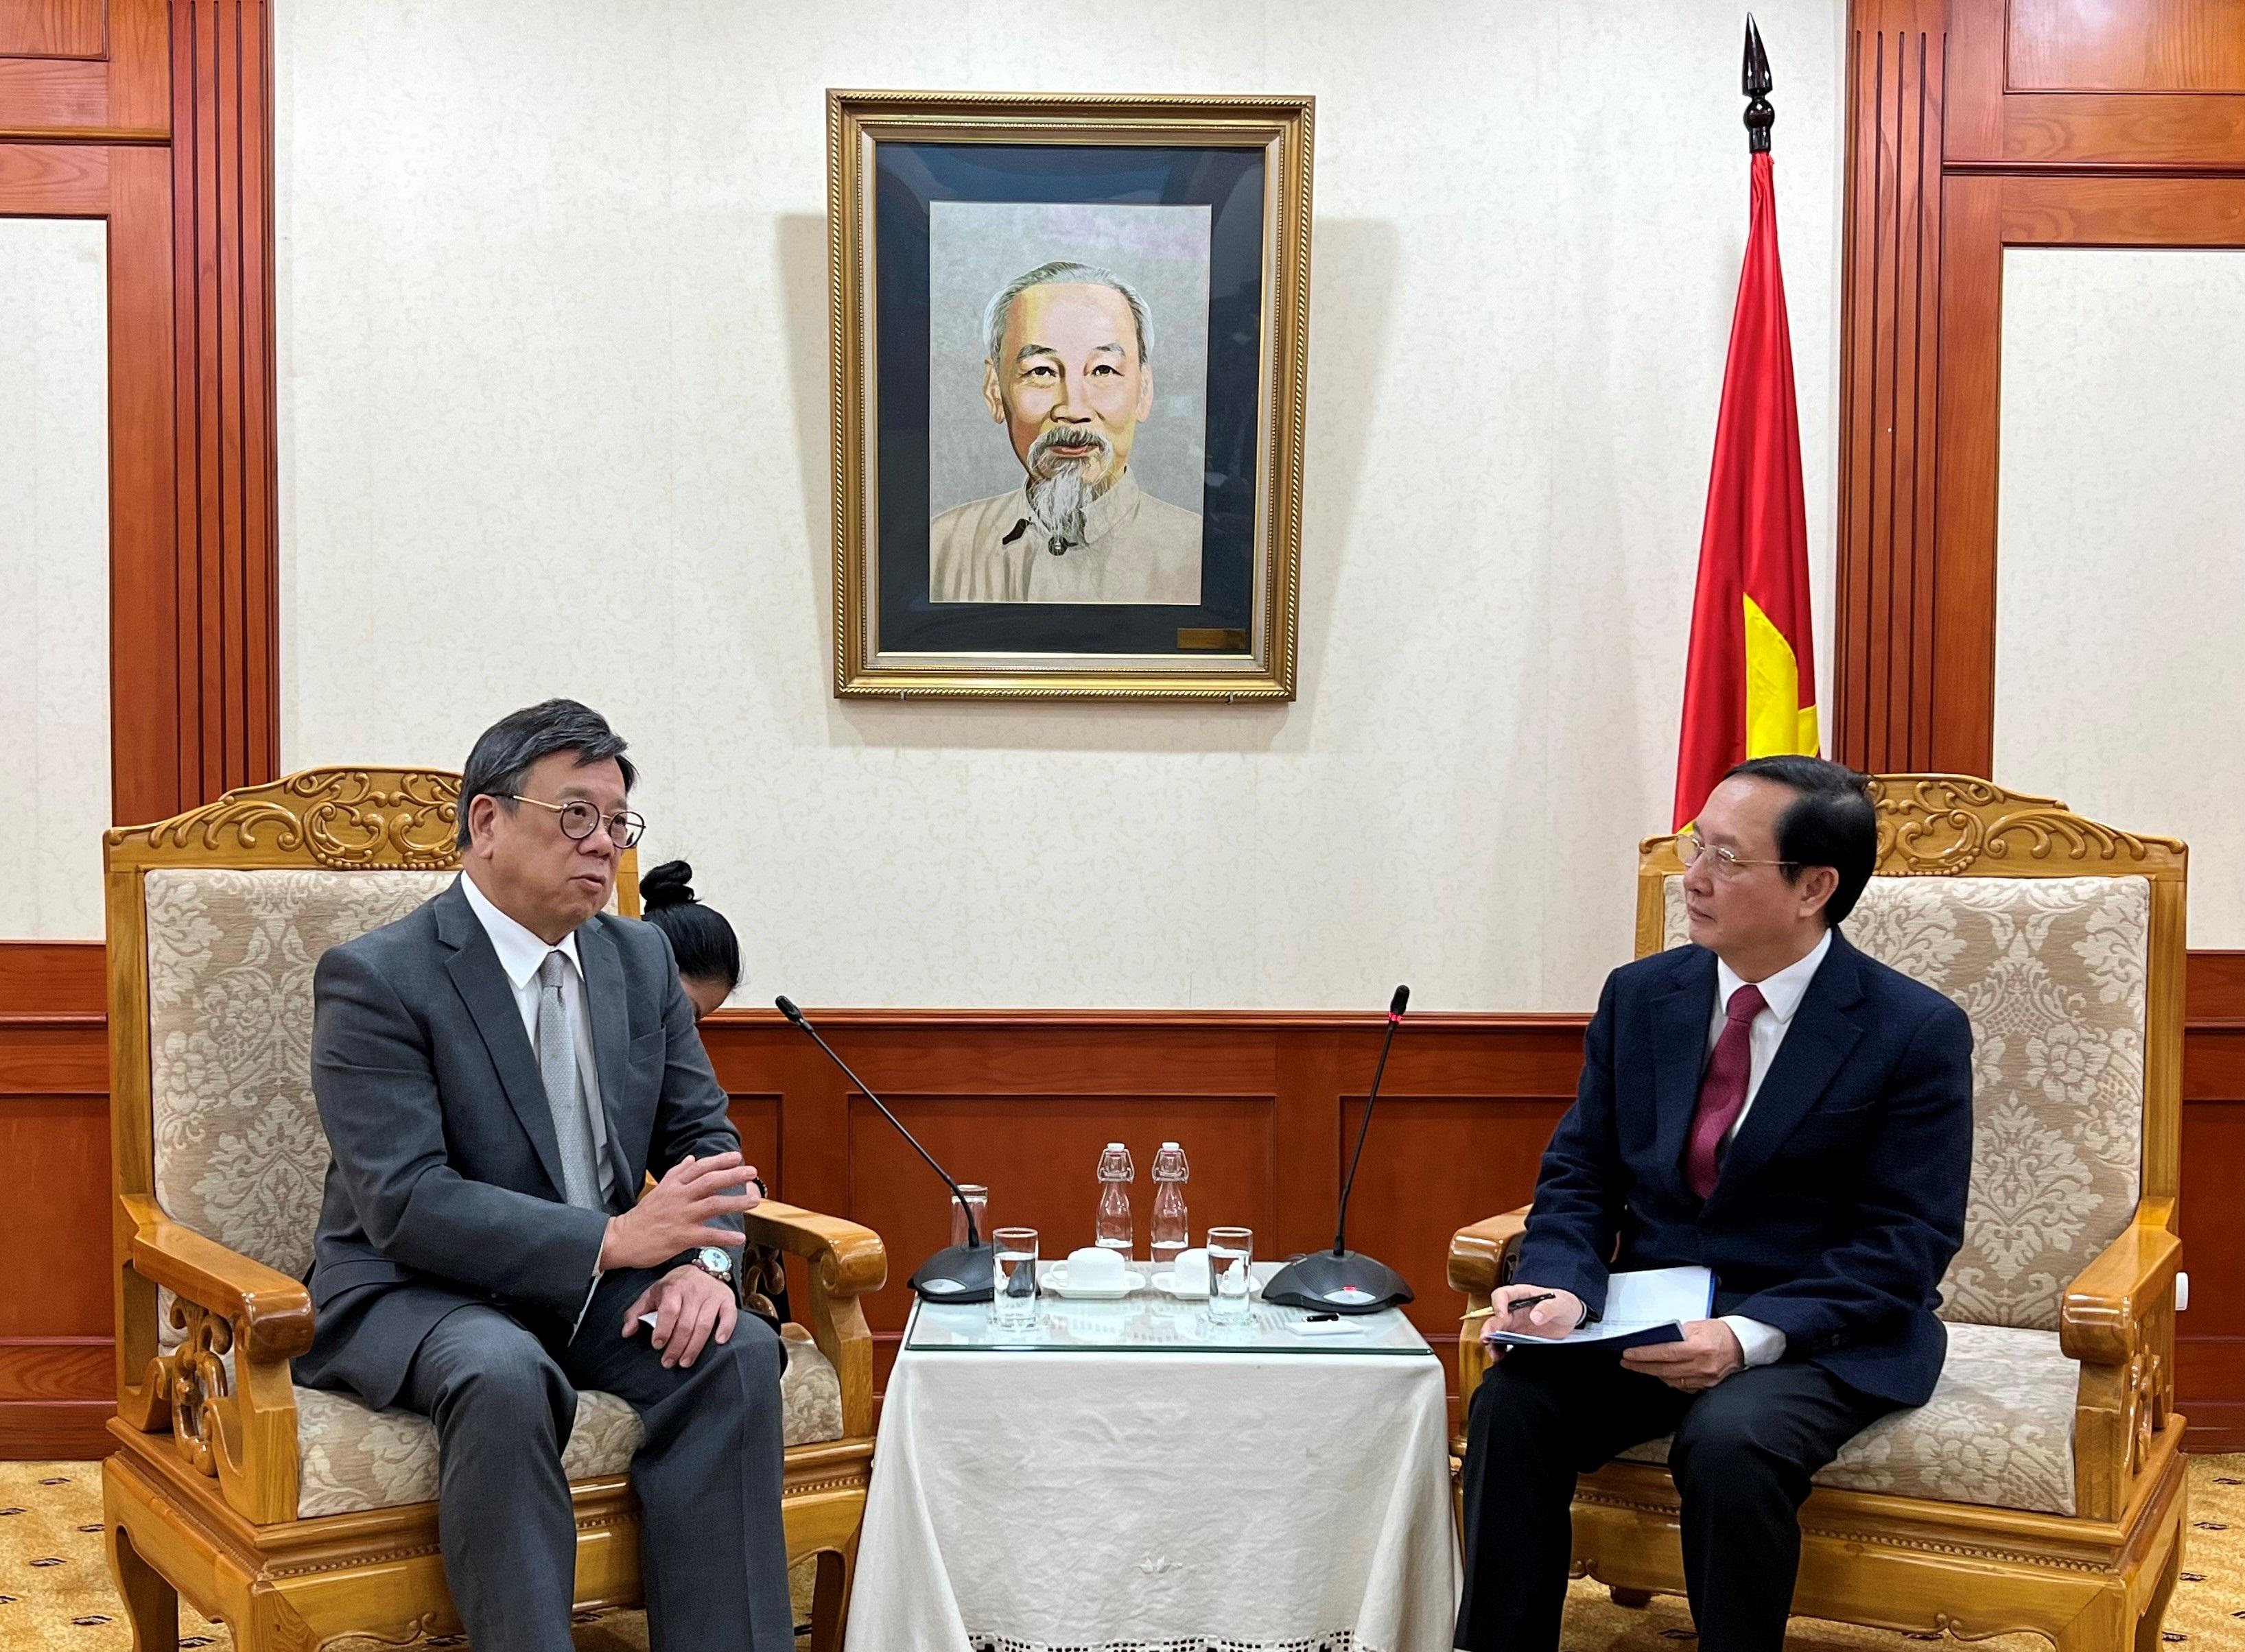 The Secretary for Commerce and Economic Development, Mr Algernon Yau (left), met with the Minister of Science and Technology of Vietnam, Mr Huynh Thanh Dat (right), in Hanoi, Vietnam, today (January 10) to exchange views on issues of mutual interest.